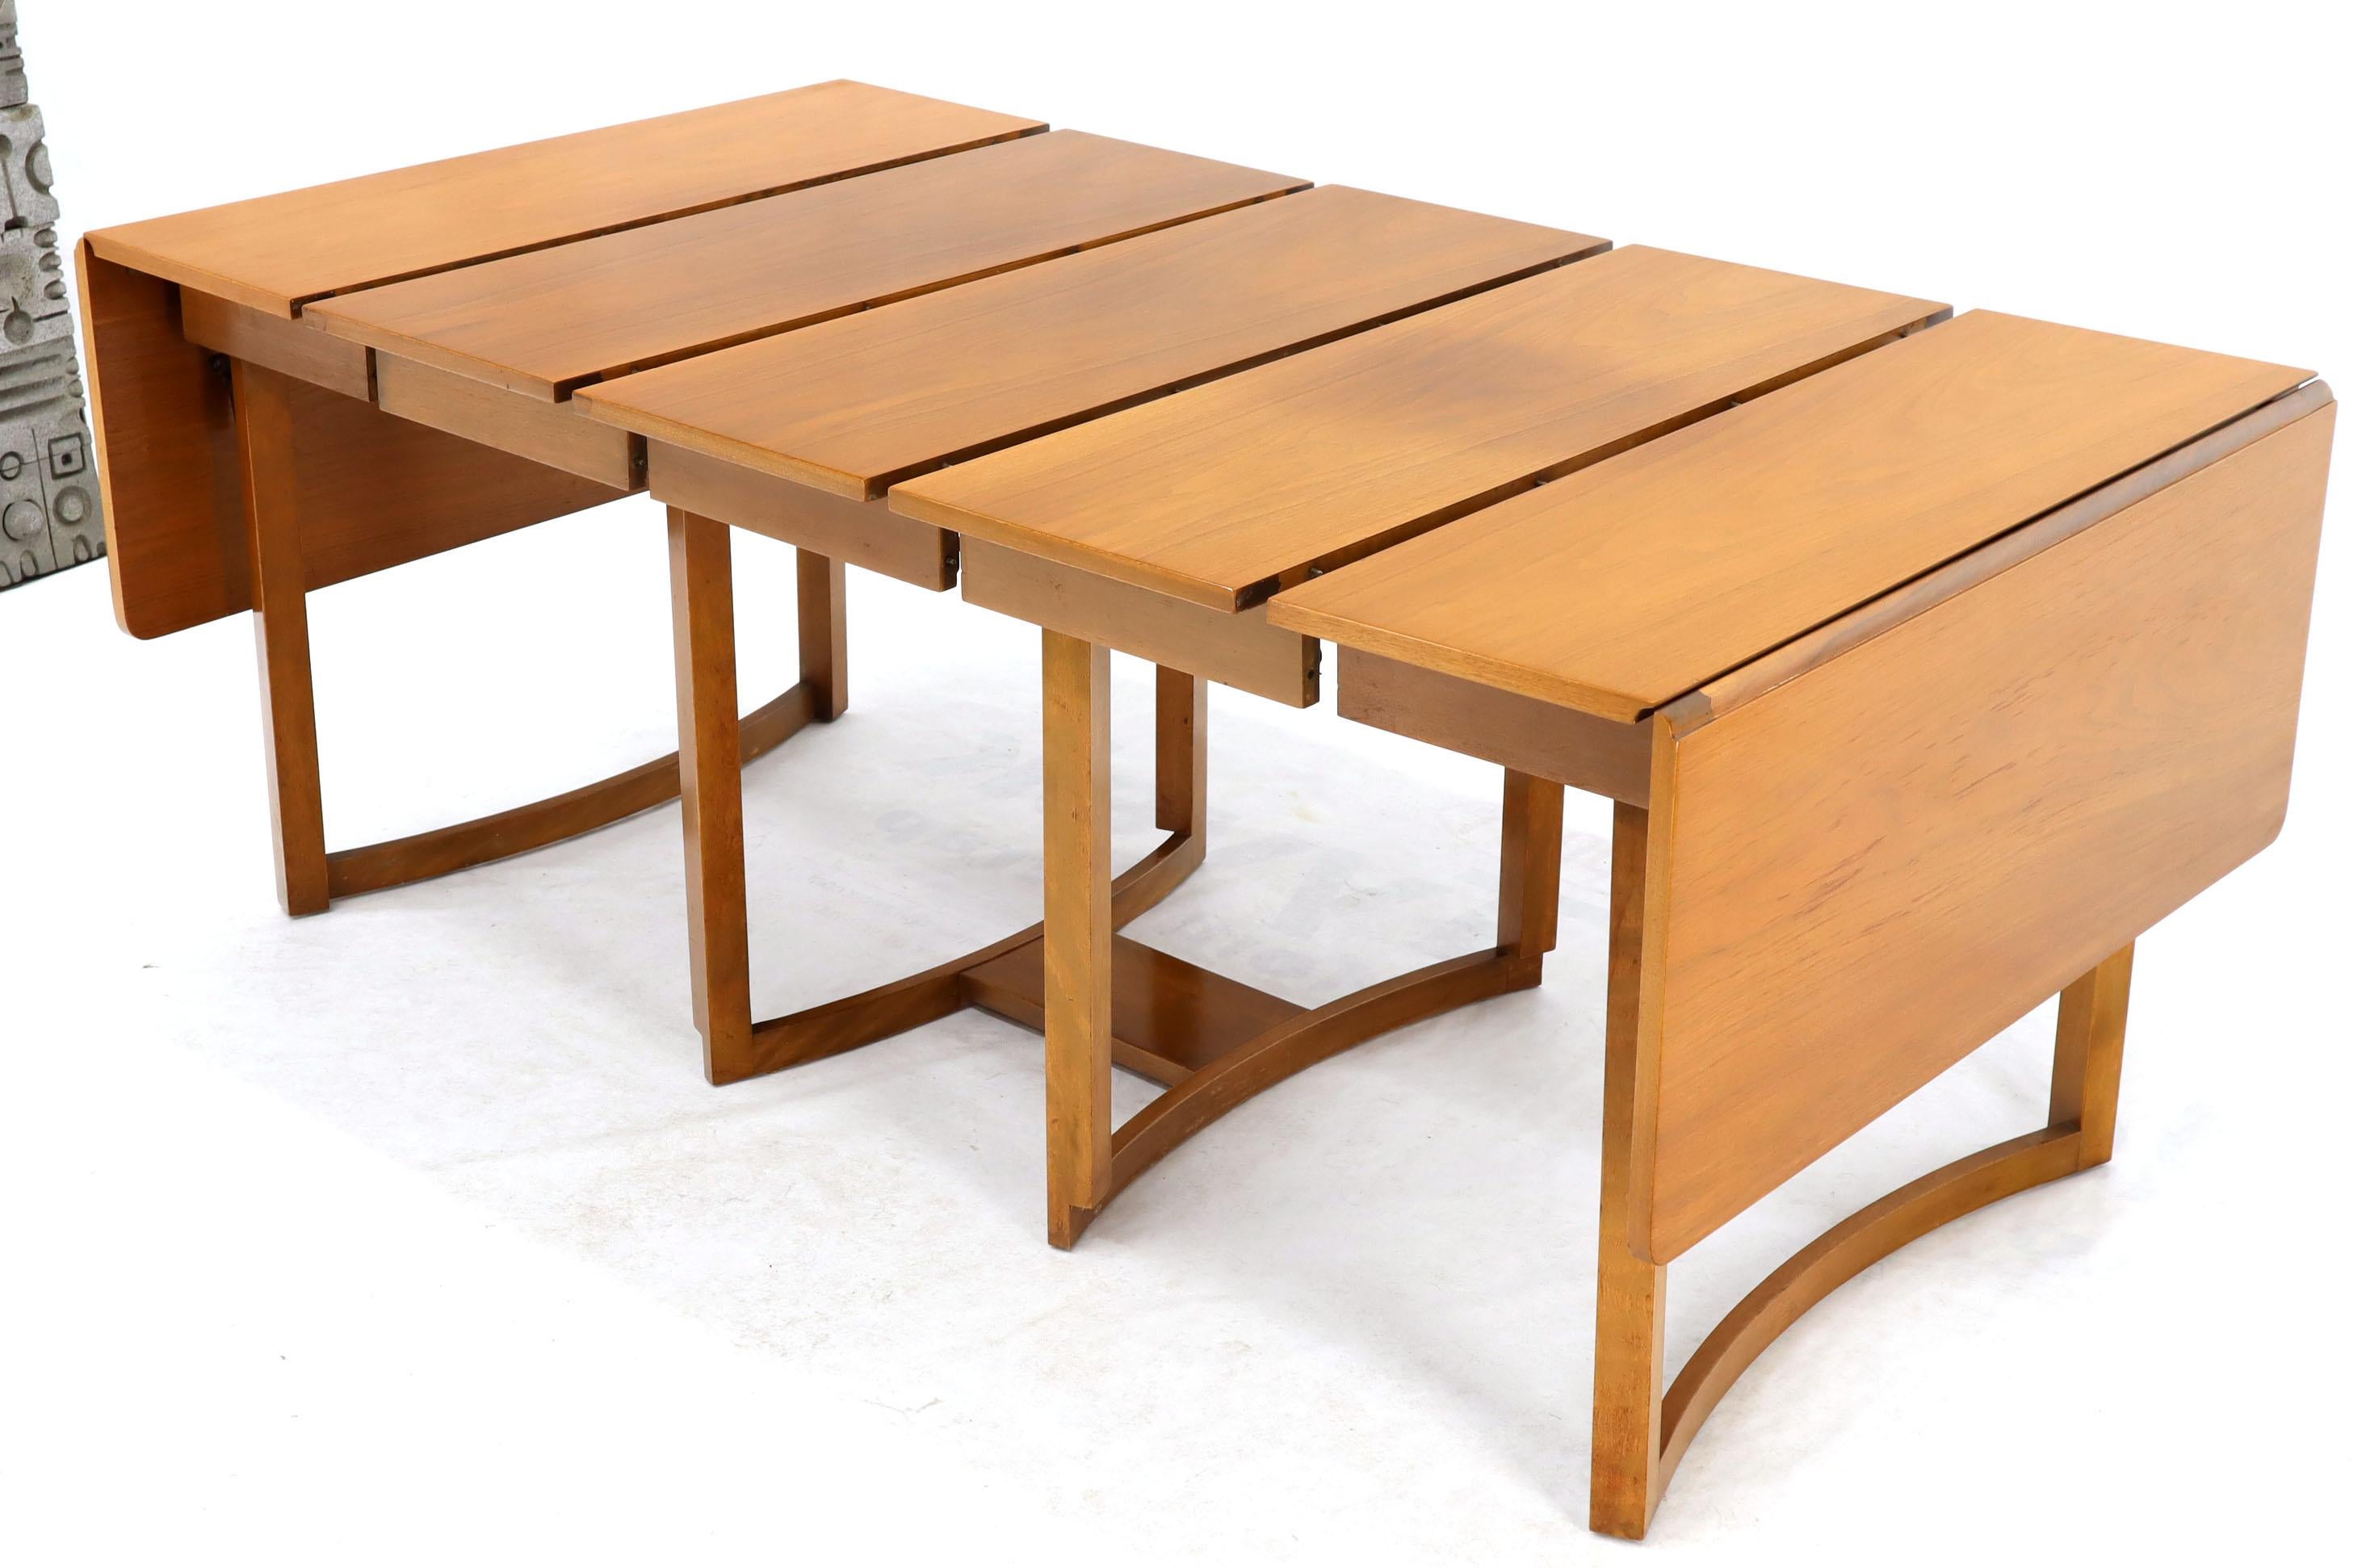 Robsjohn Gibbings for Widdicomb mid century modern dining table with beautiful glow light walnut finish. Completely folded measures: 26x40x29